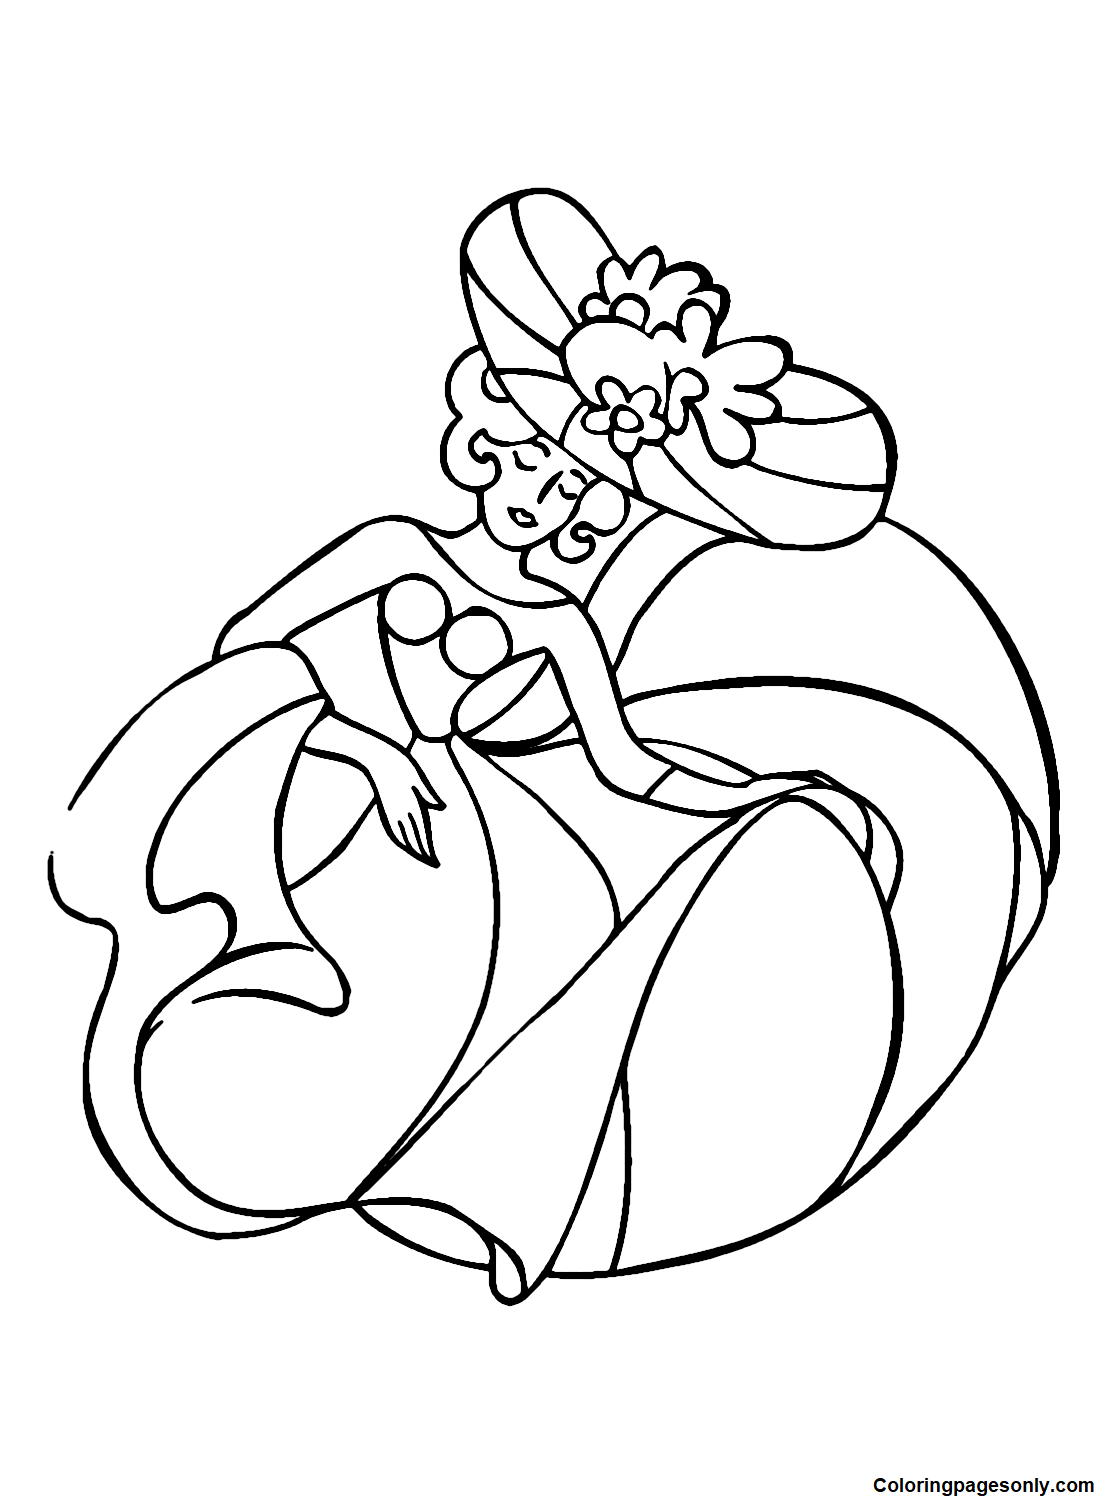 Dancing Pictures Coloring Page